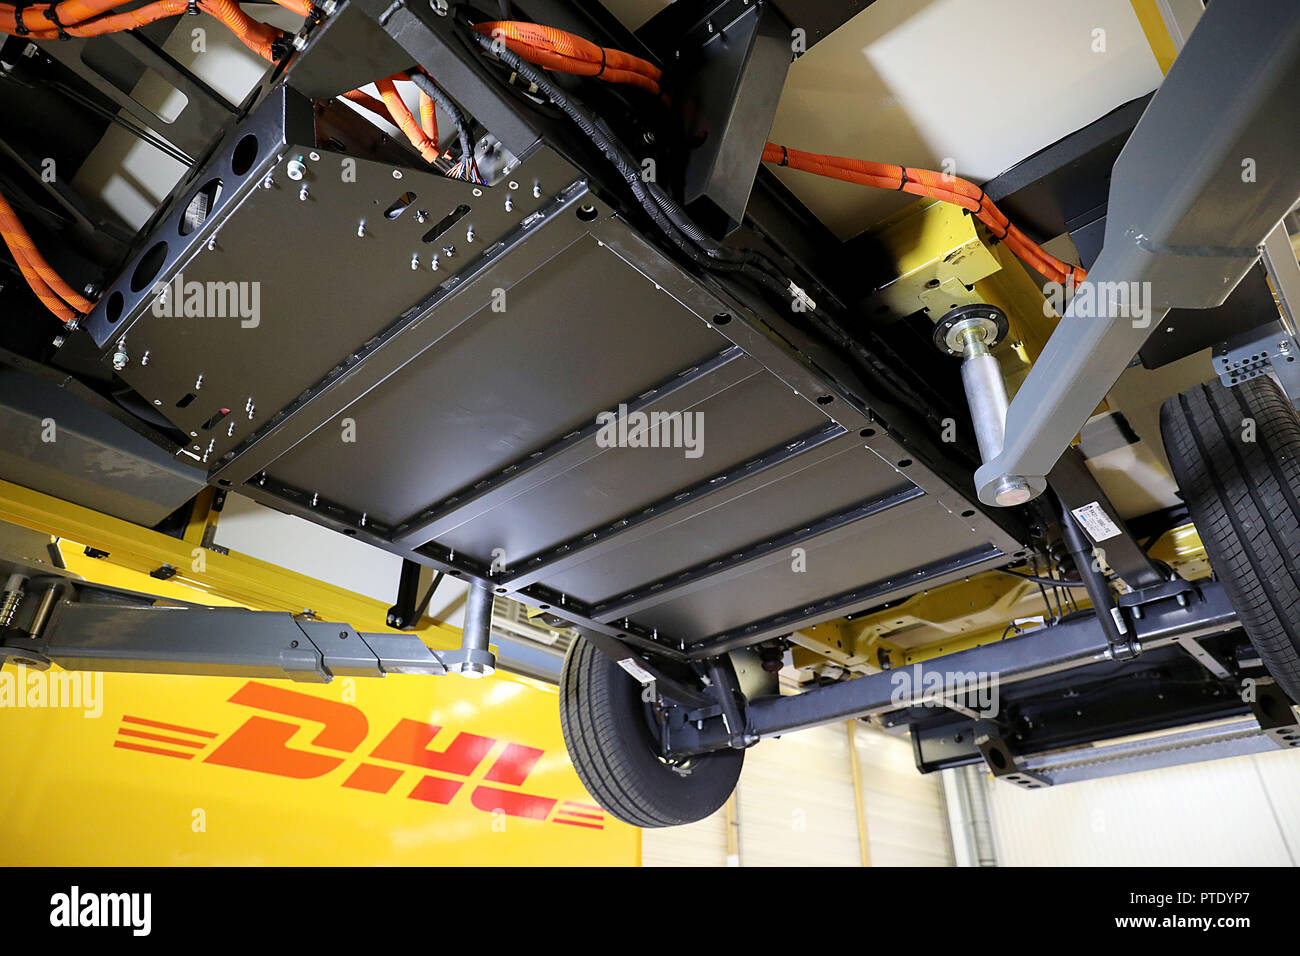 09 October 2018, North Rhine-Westphalia, Cologne: The battery of the  StreetScooter Work XL hangs under the vehicle. For the first time, Deutsche  Post DHL is not building the street scooter itself, but